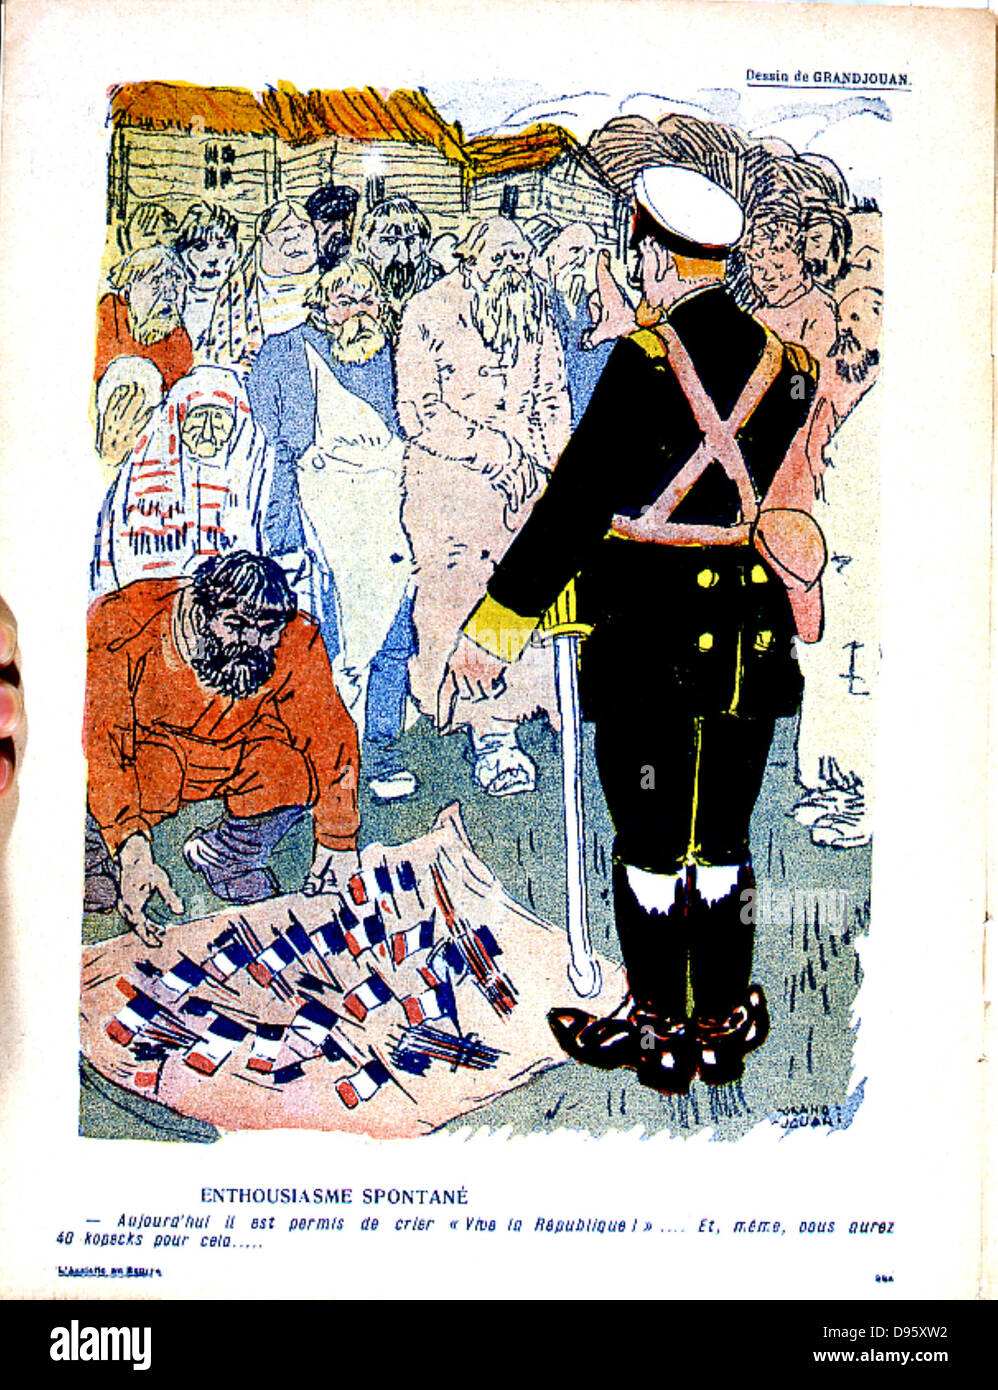 Russian foreign policy. In 1908 Armand Fallieres, President of France 1906-1913, visited Russia. Policeman is telling a paid crowd that today they can shout 'Vive la Republique'. Cartoon from L'Assiette au Buerre', Paris, 1908. Stock Photo